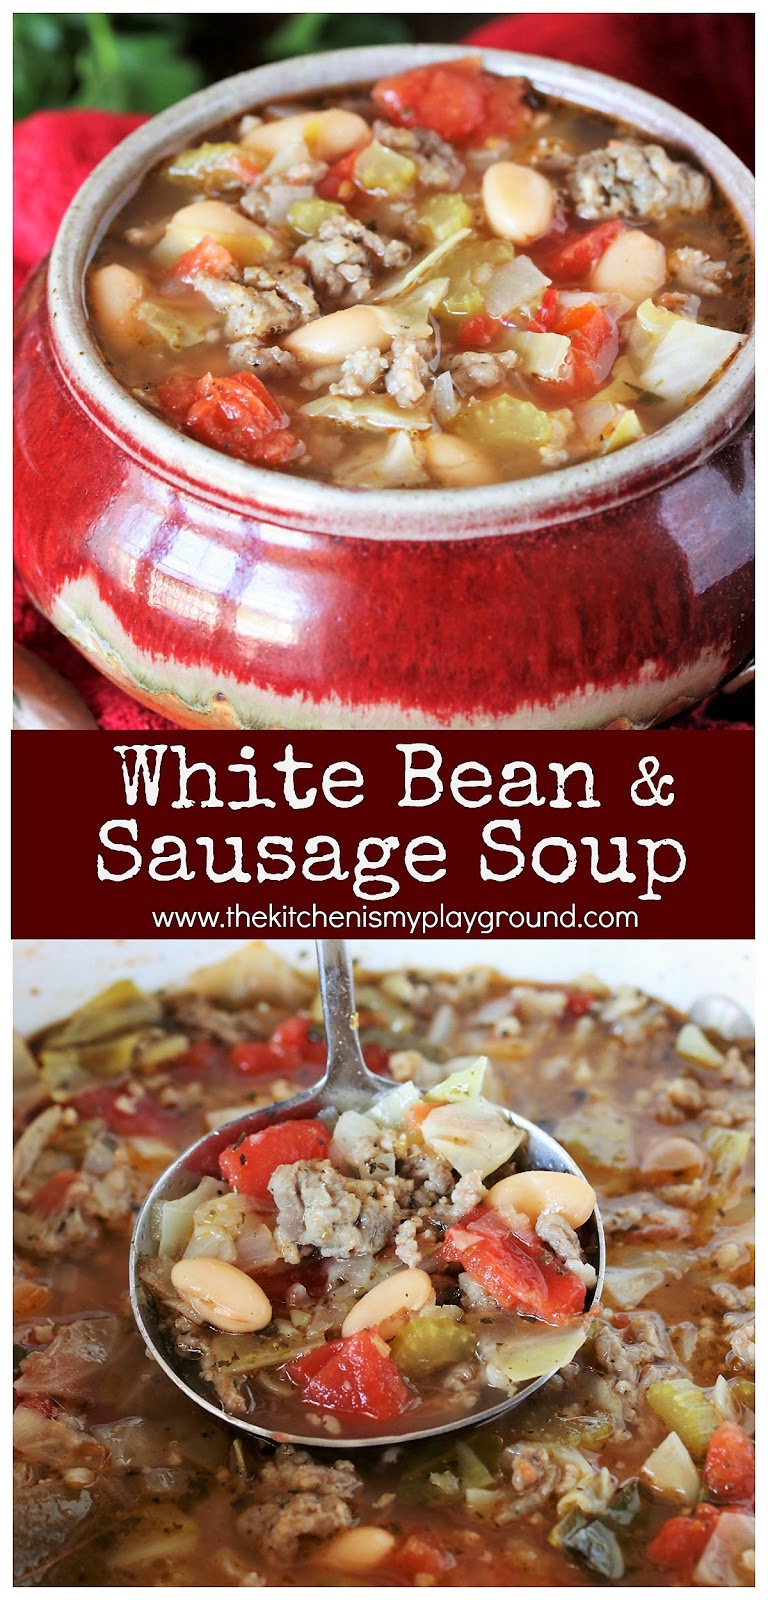 White Bean & Sausage Soup | The Kitchen is My Playground